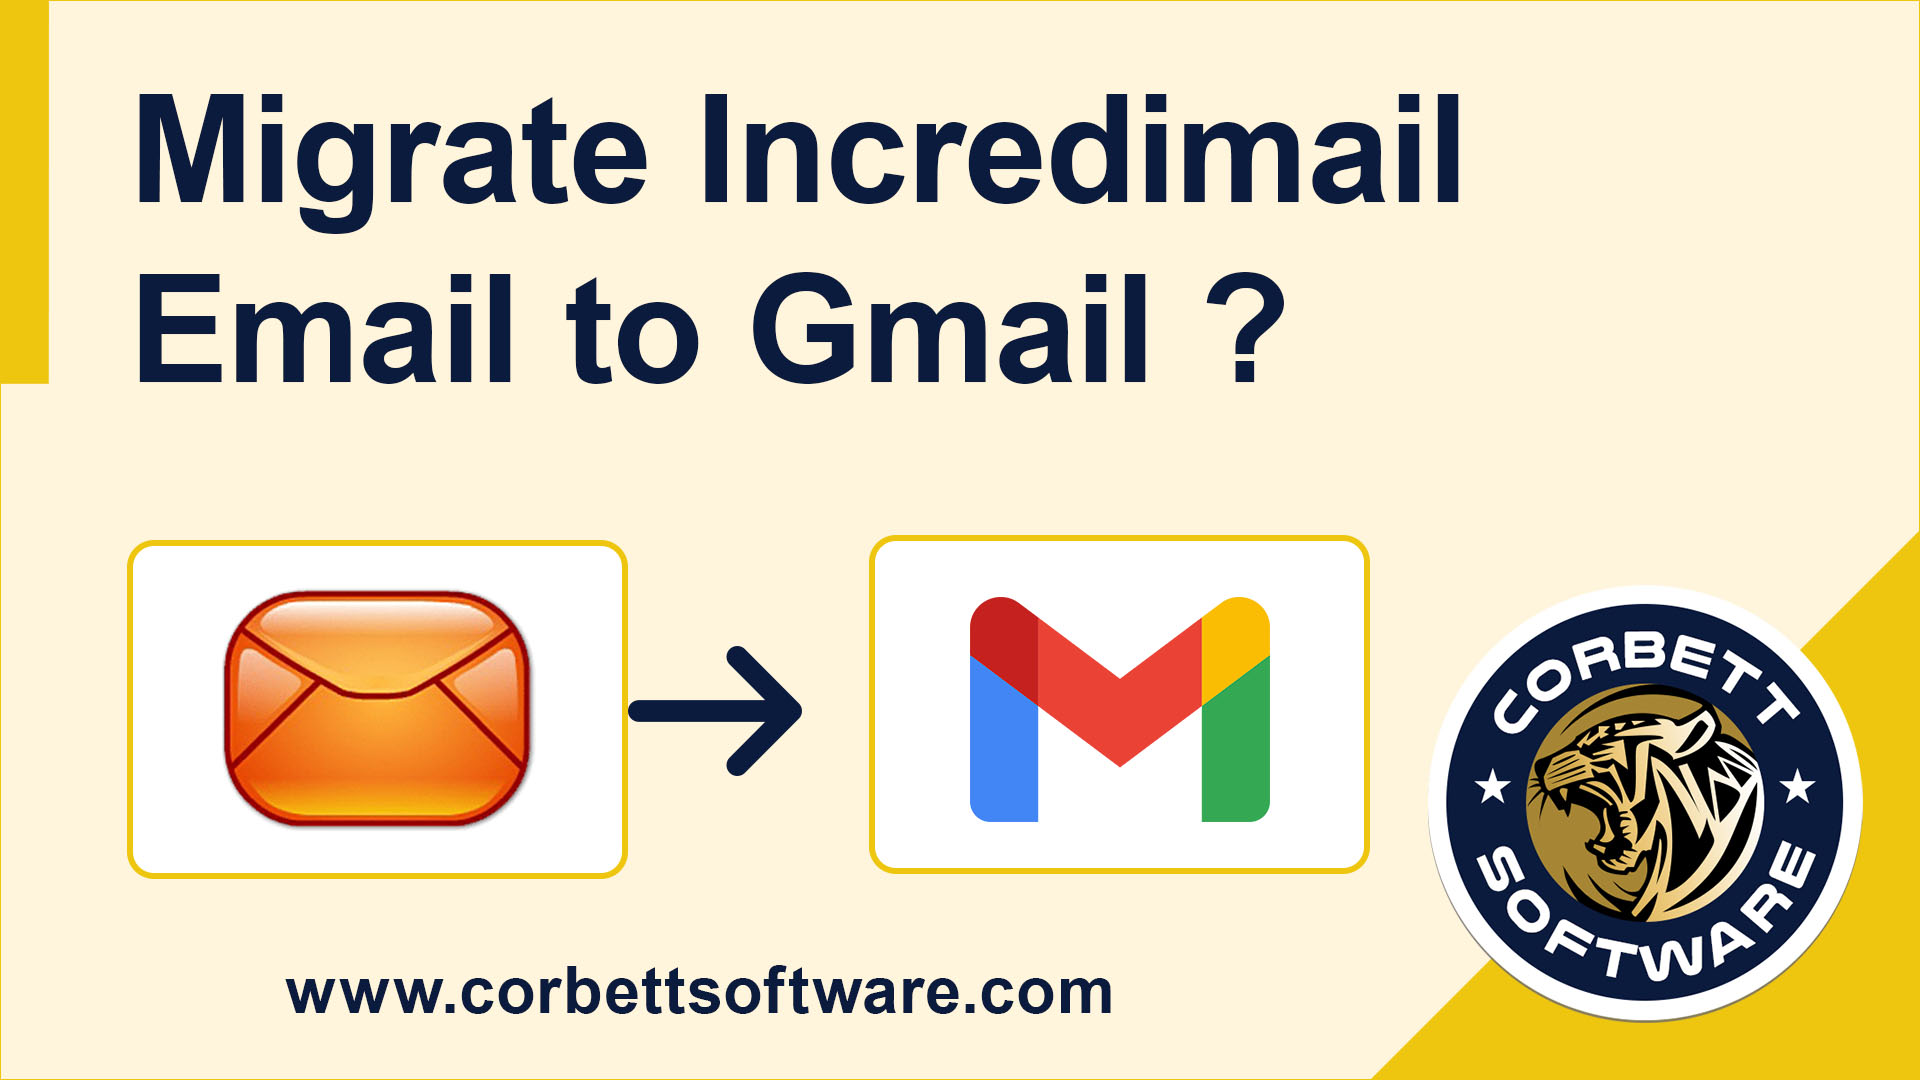 Migrate Incredimail Email to Gmail